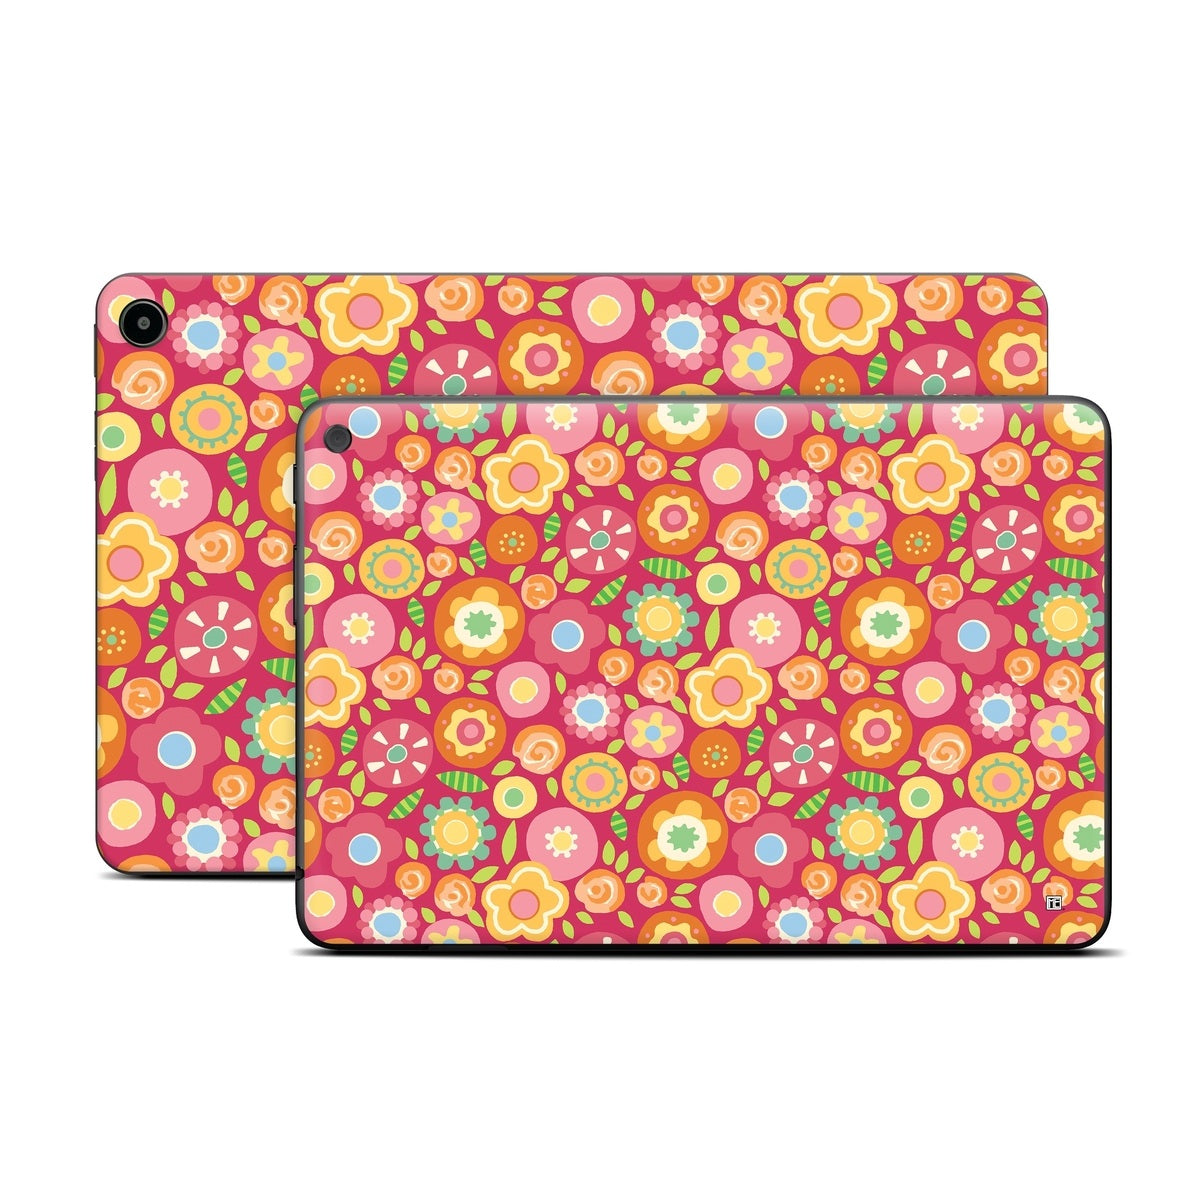 Flowers Squished - Amazon Fire Skin